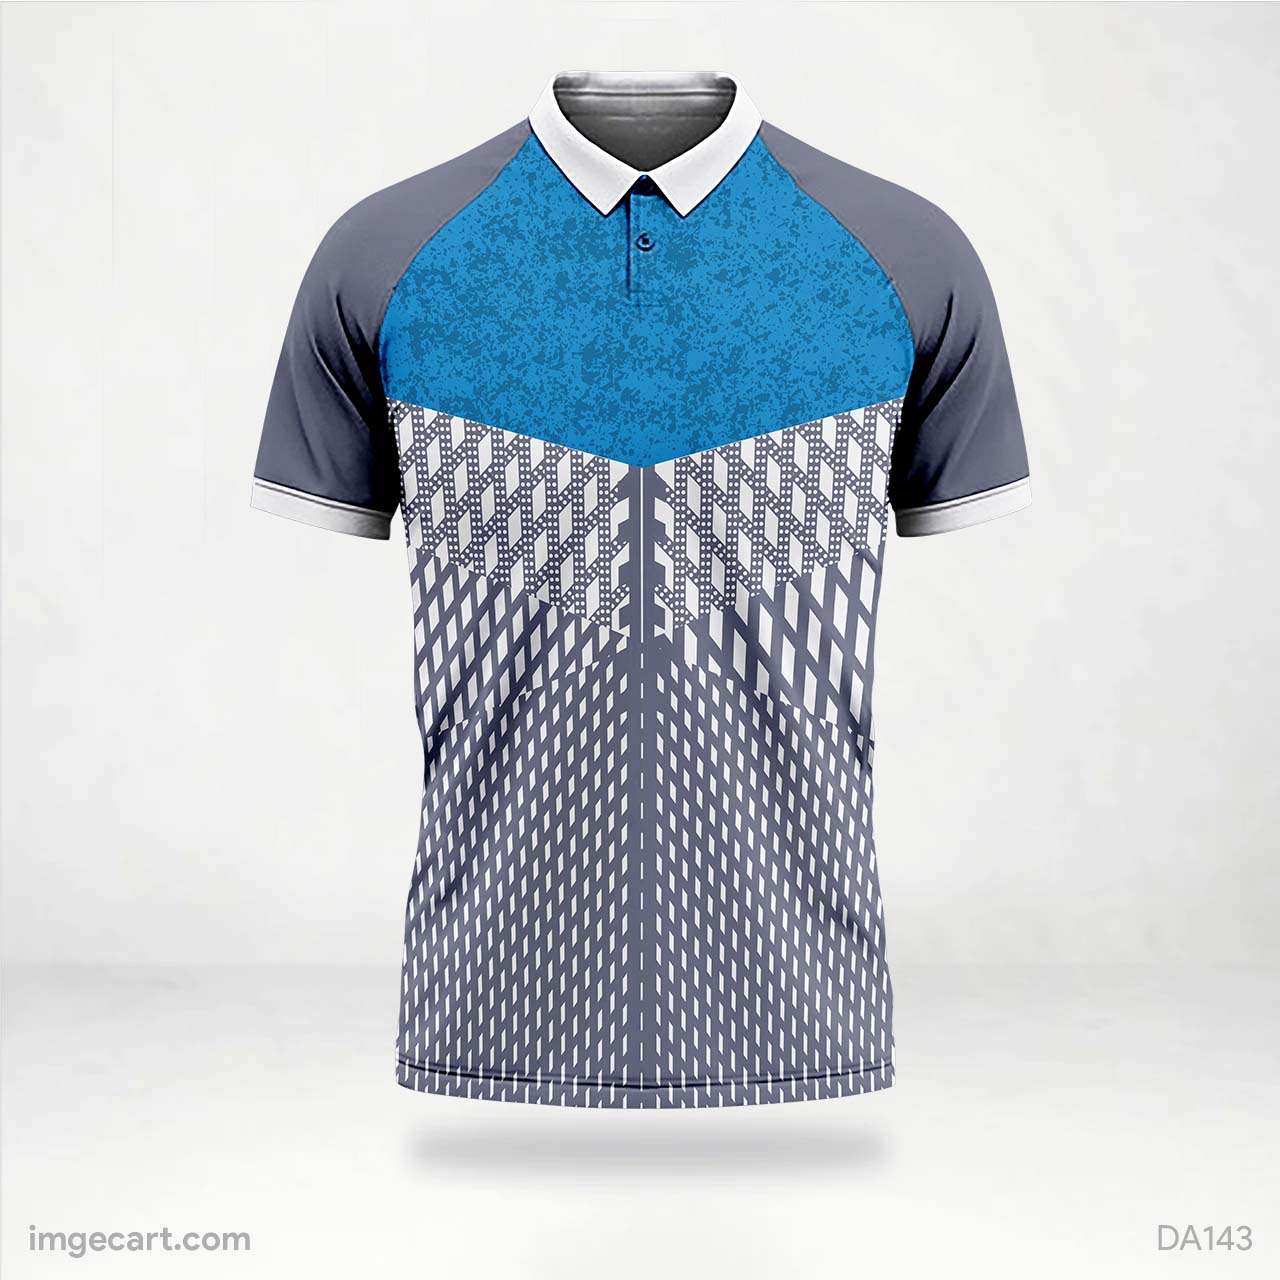 Cricket Jersey Design White with Blue and Grey Pattern - imgecart